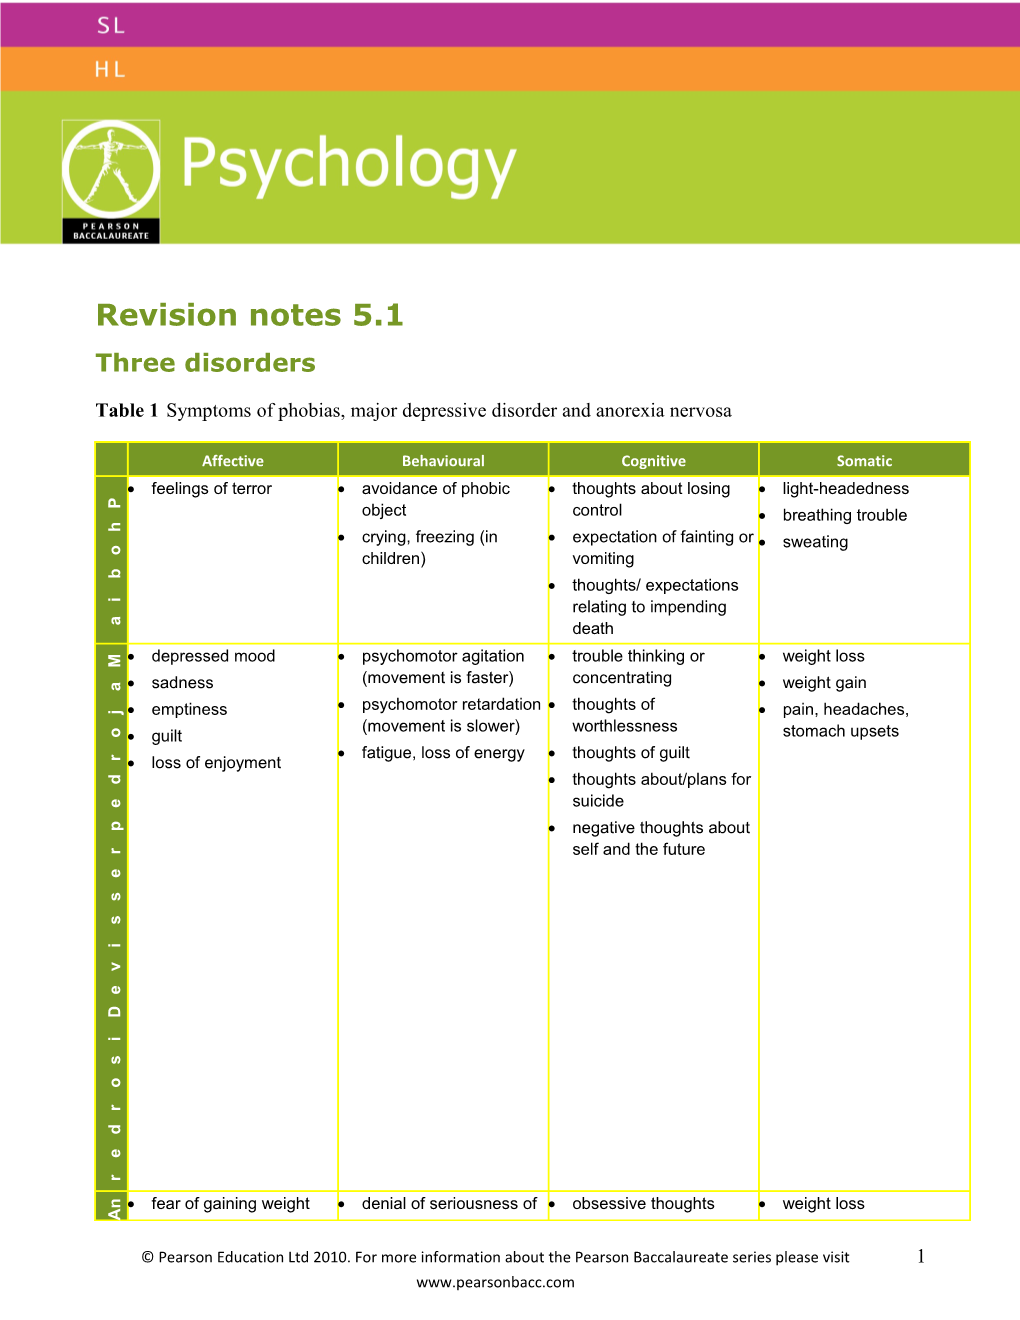 Revision Notes 5.1